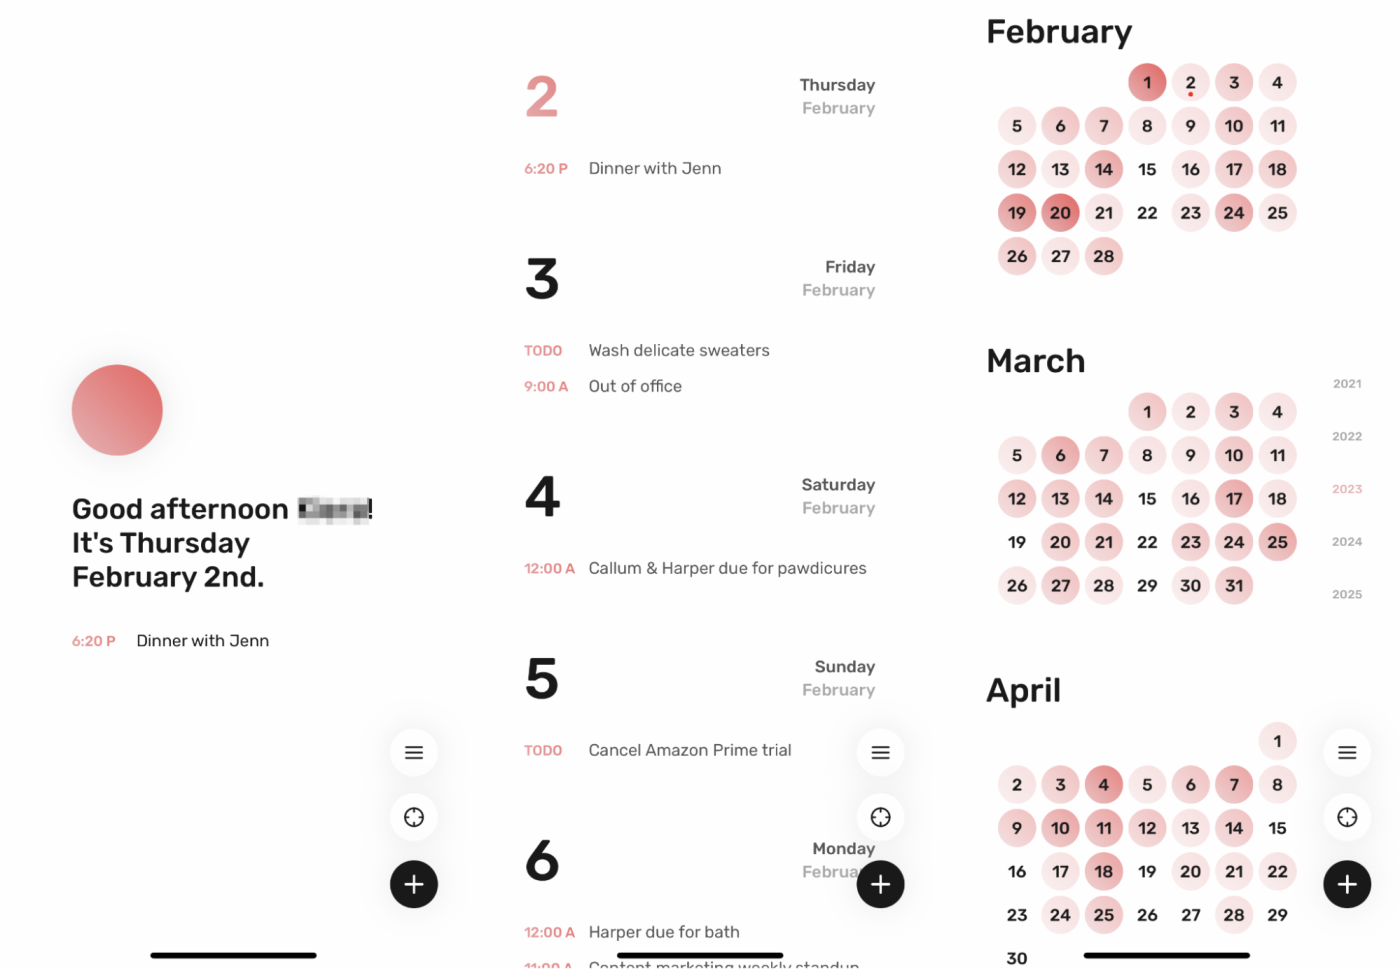 Dawn, our pick for the best iPhone calendar app for beautiful design and function